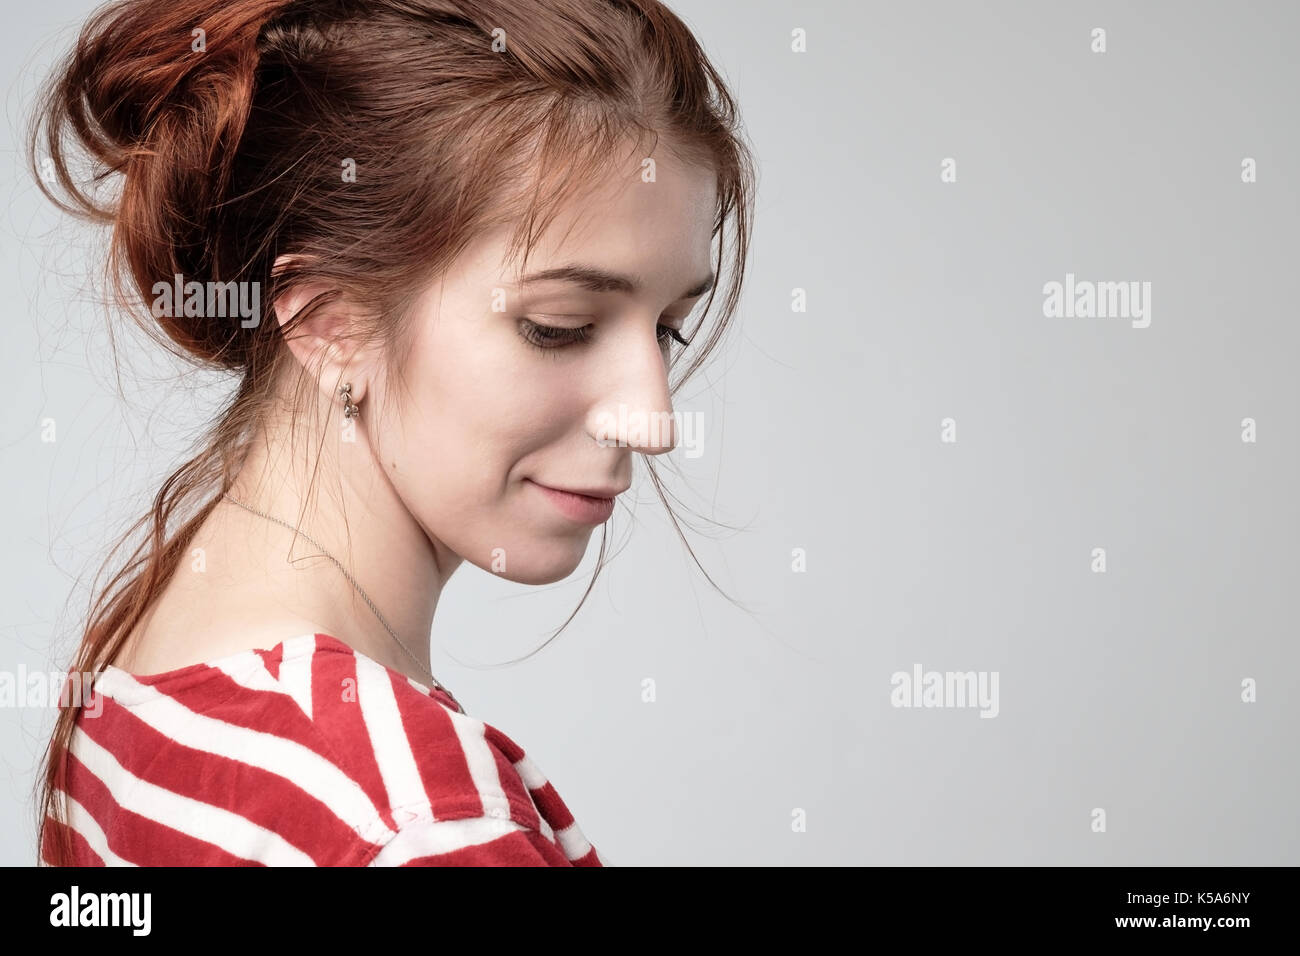 beautiful teenager girl with red hair side view. Stock Photo